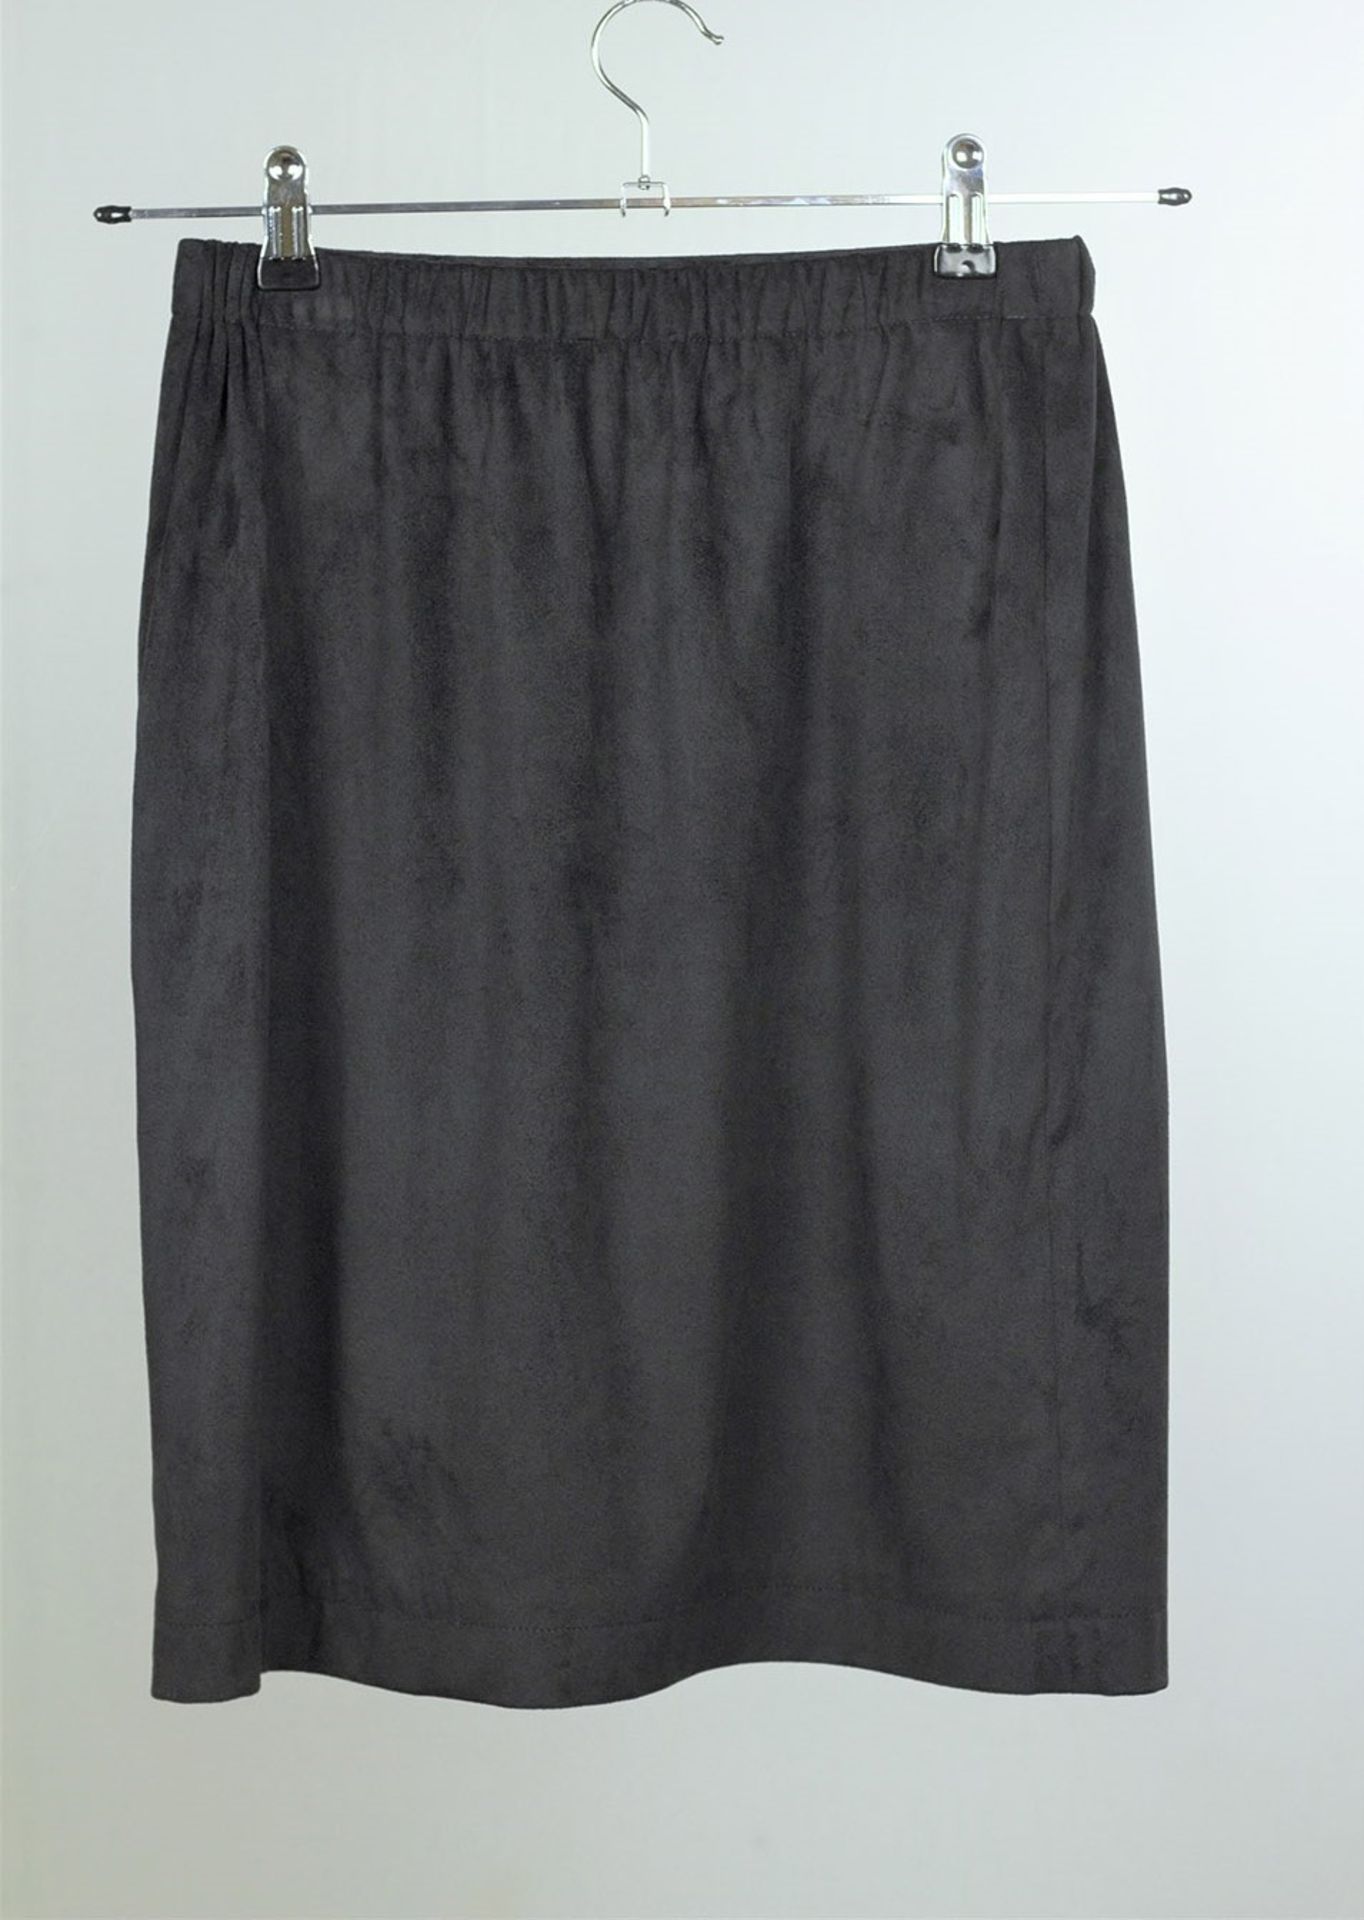 1 x Boutique Le Duc Dark Grey Skirt - From a High End Clothing Boutique In The - Image 3 of 3